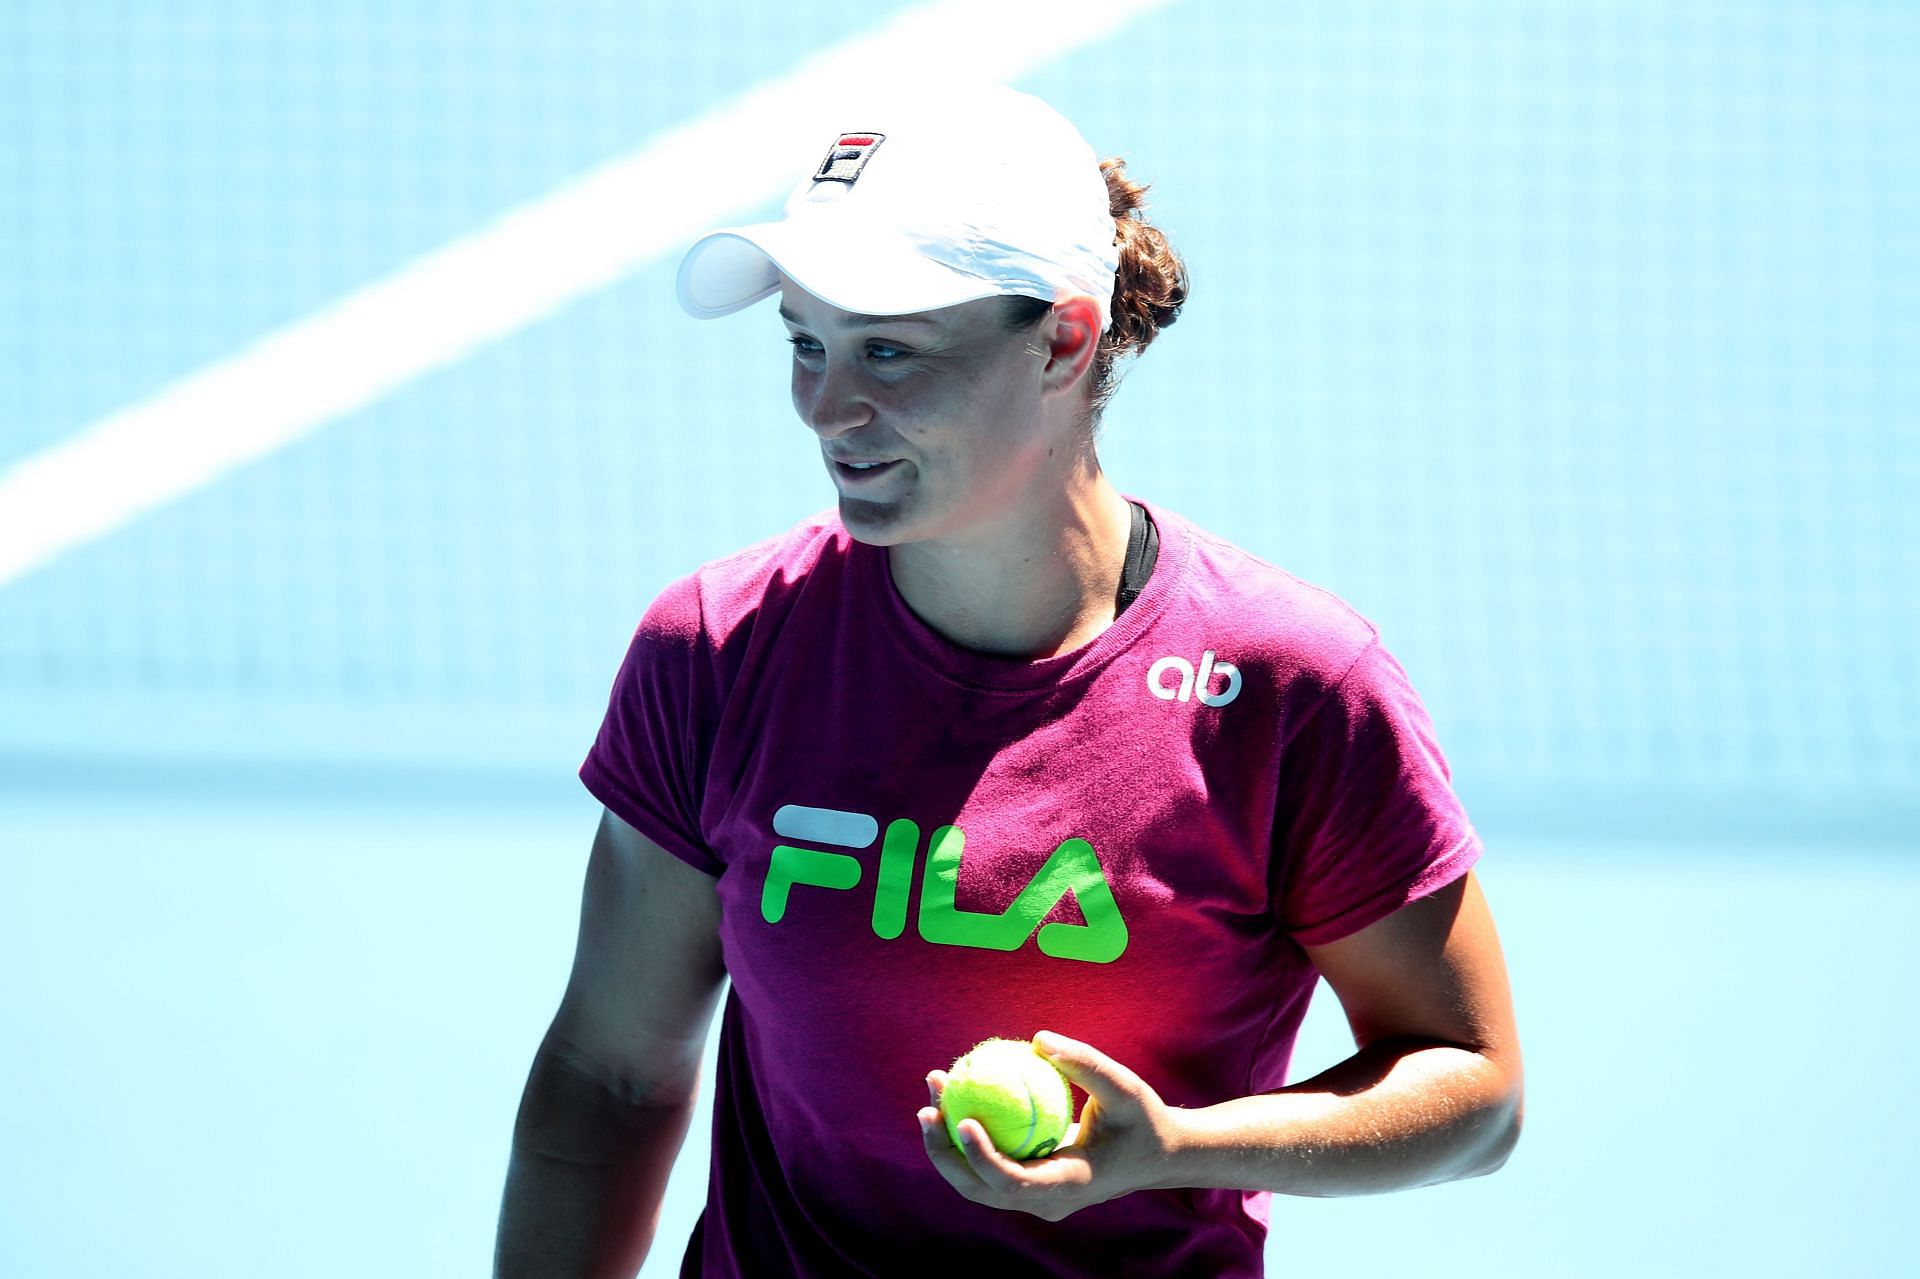 Ashliegh Barty squares off against Lesia Tsurenko in the first round of the Australian Open